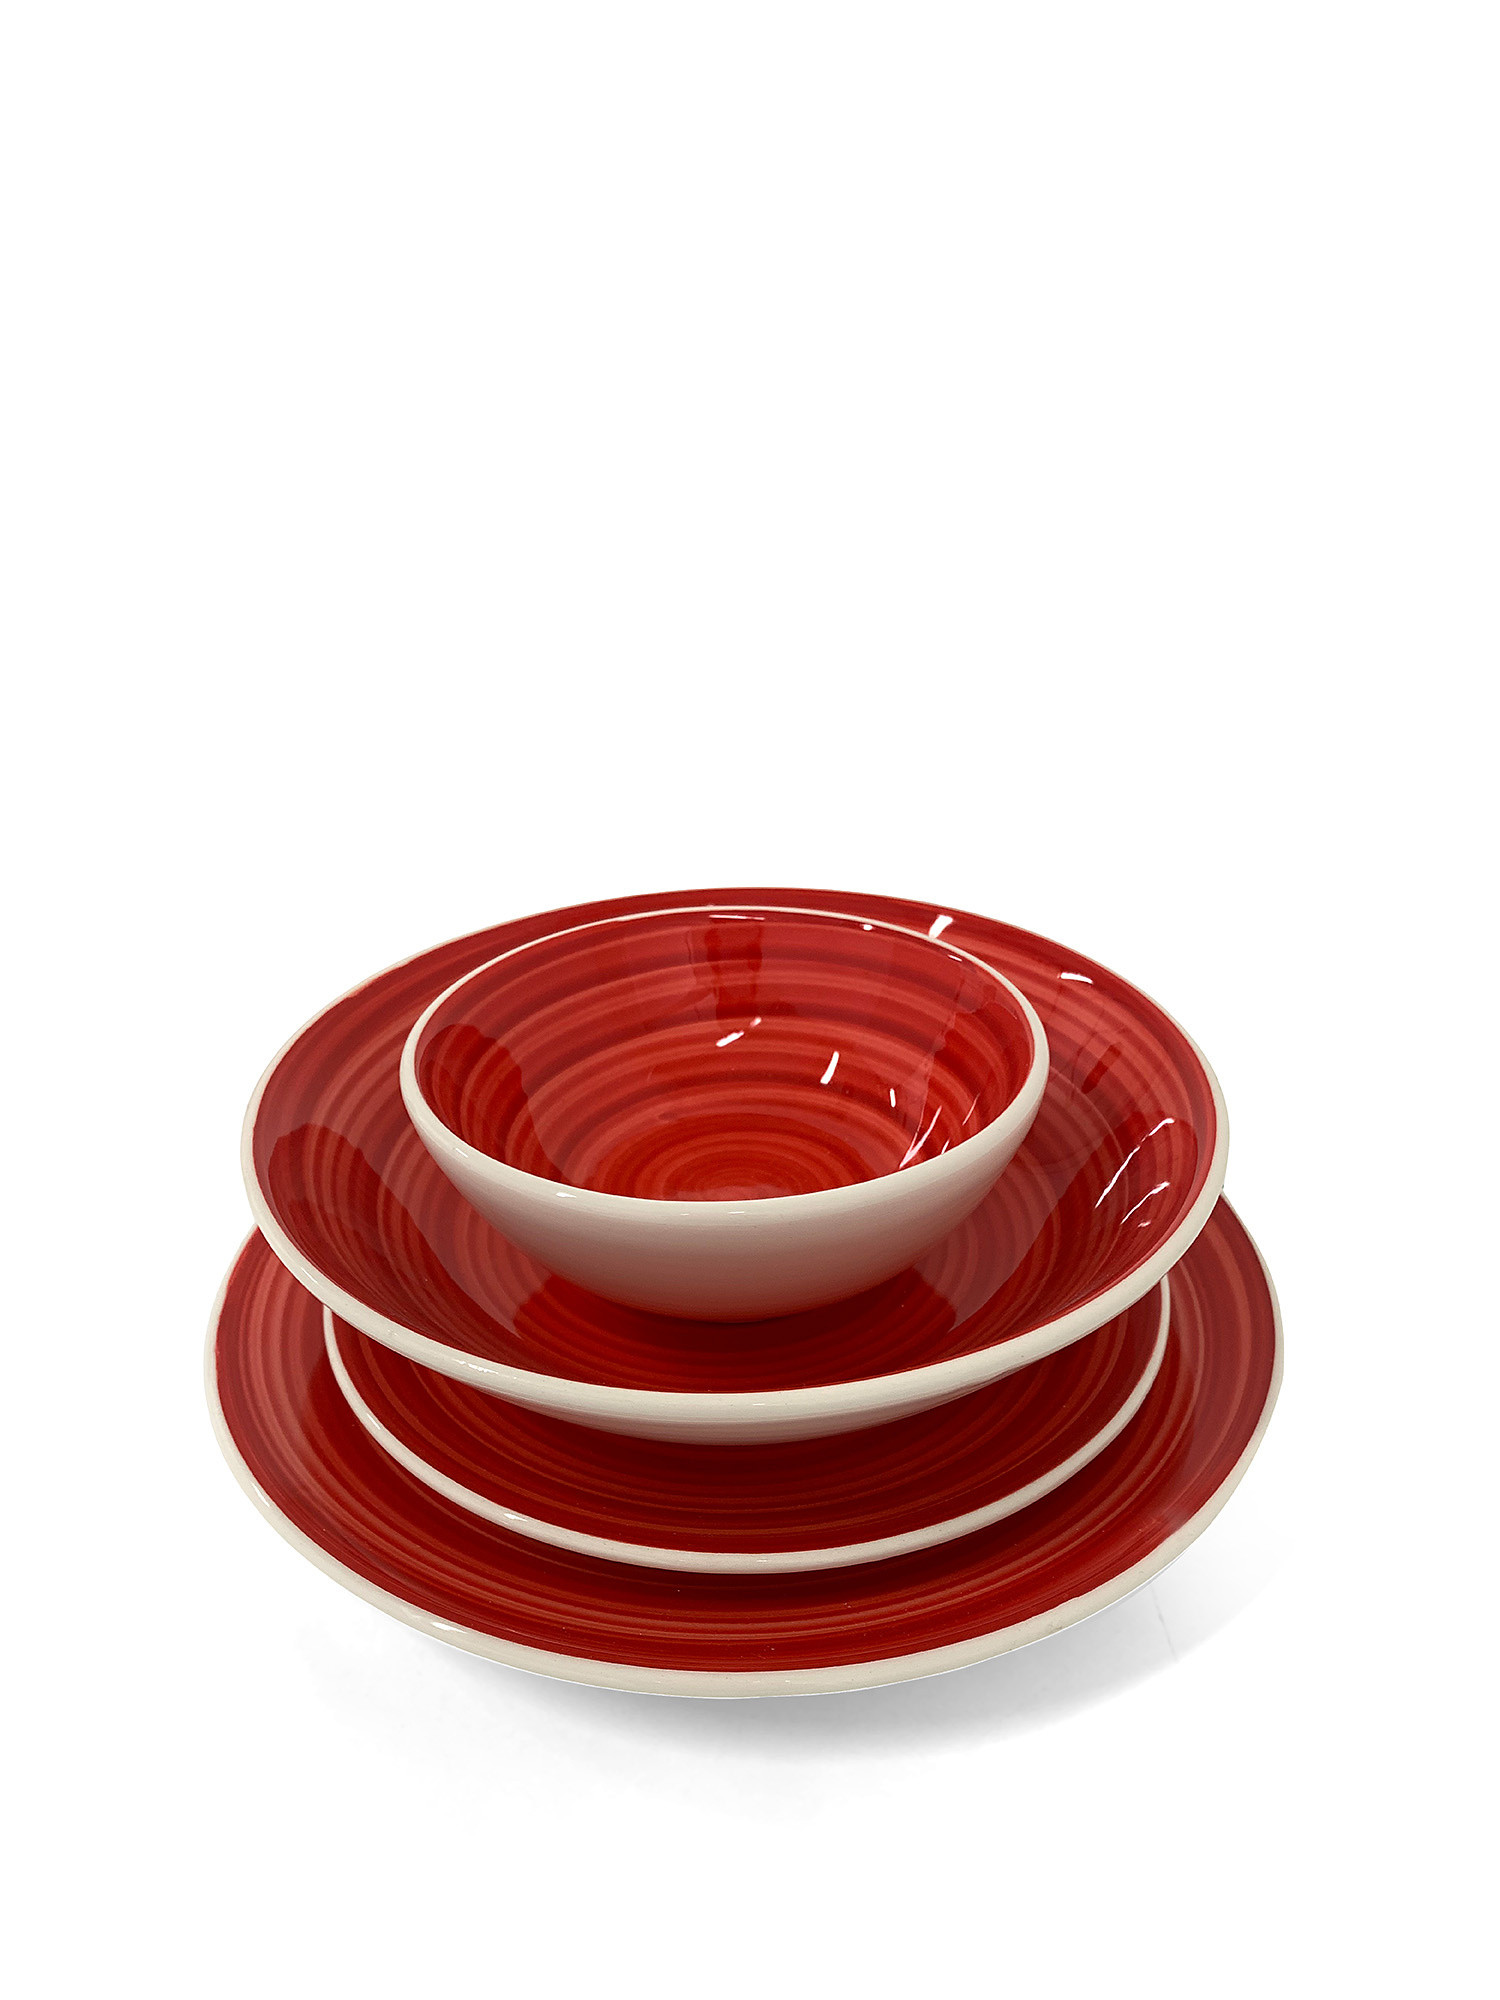 Spiral hand painted ceramic bowl, Red, large image number 1